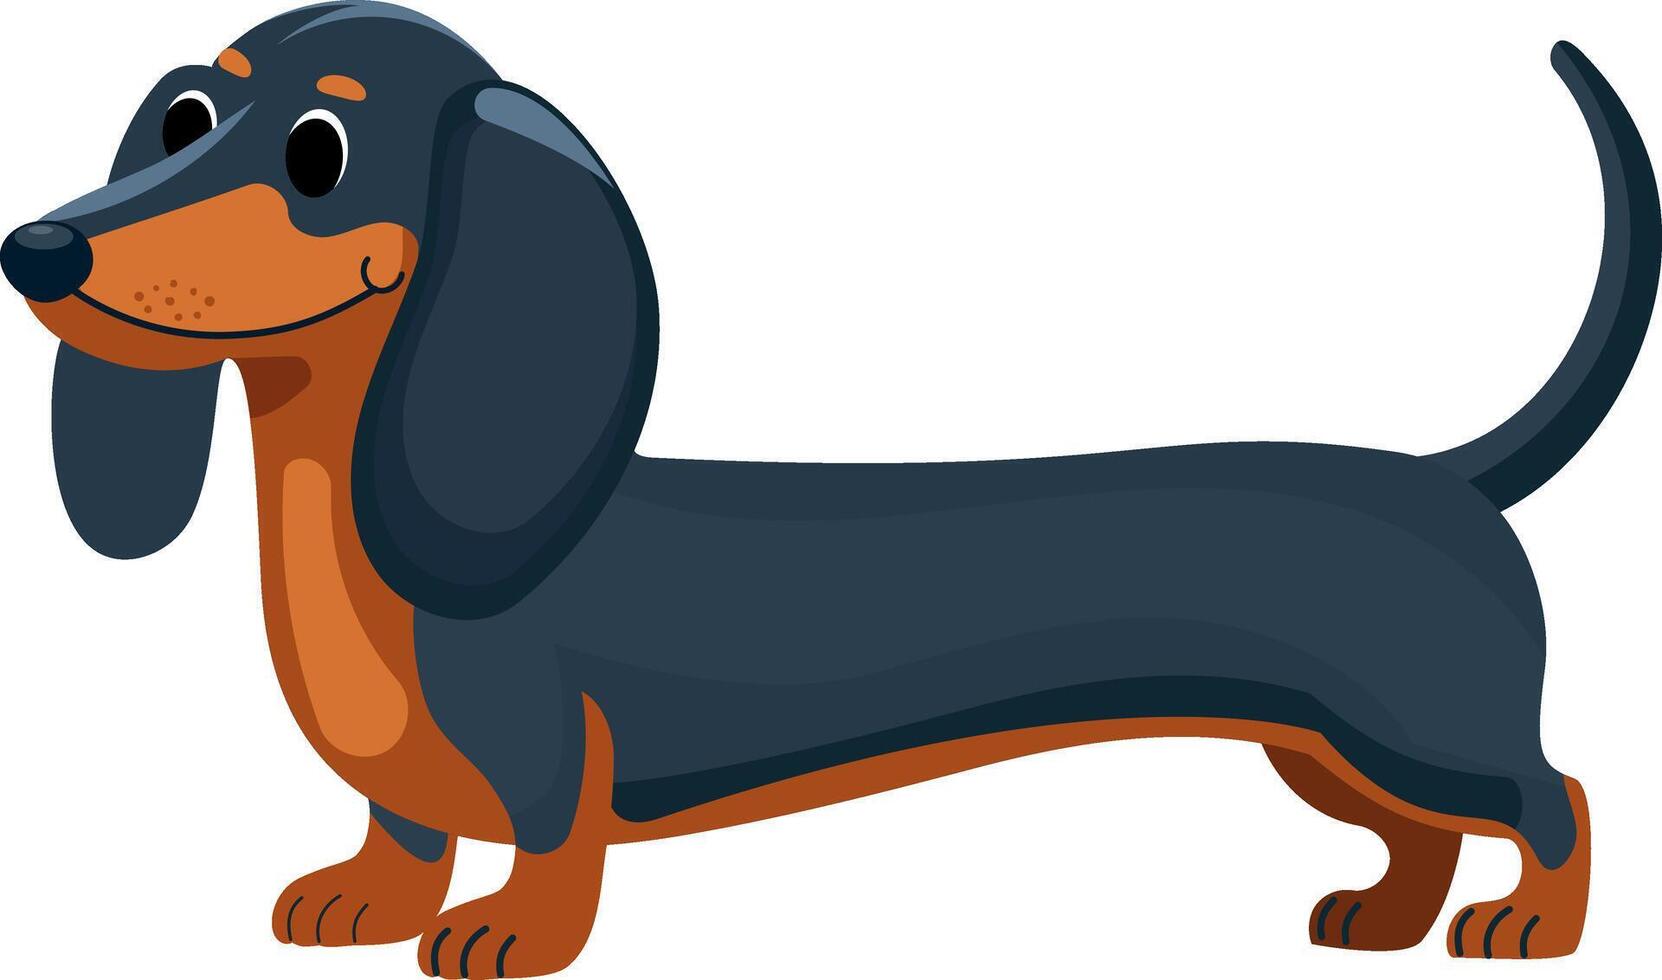 Happy dachshund walking or stay . Cute sausage dogs with tails up in movement, funny pet dog, simple flat vector